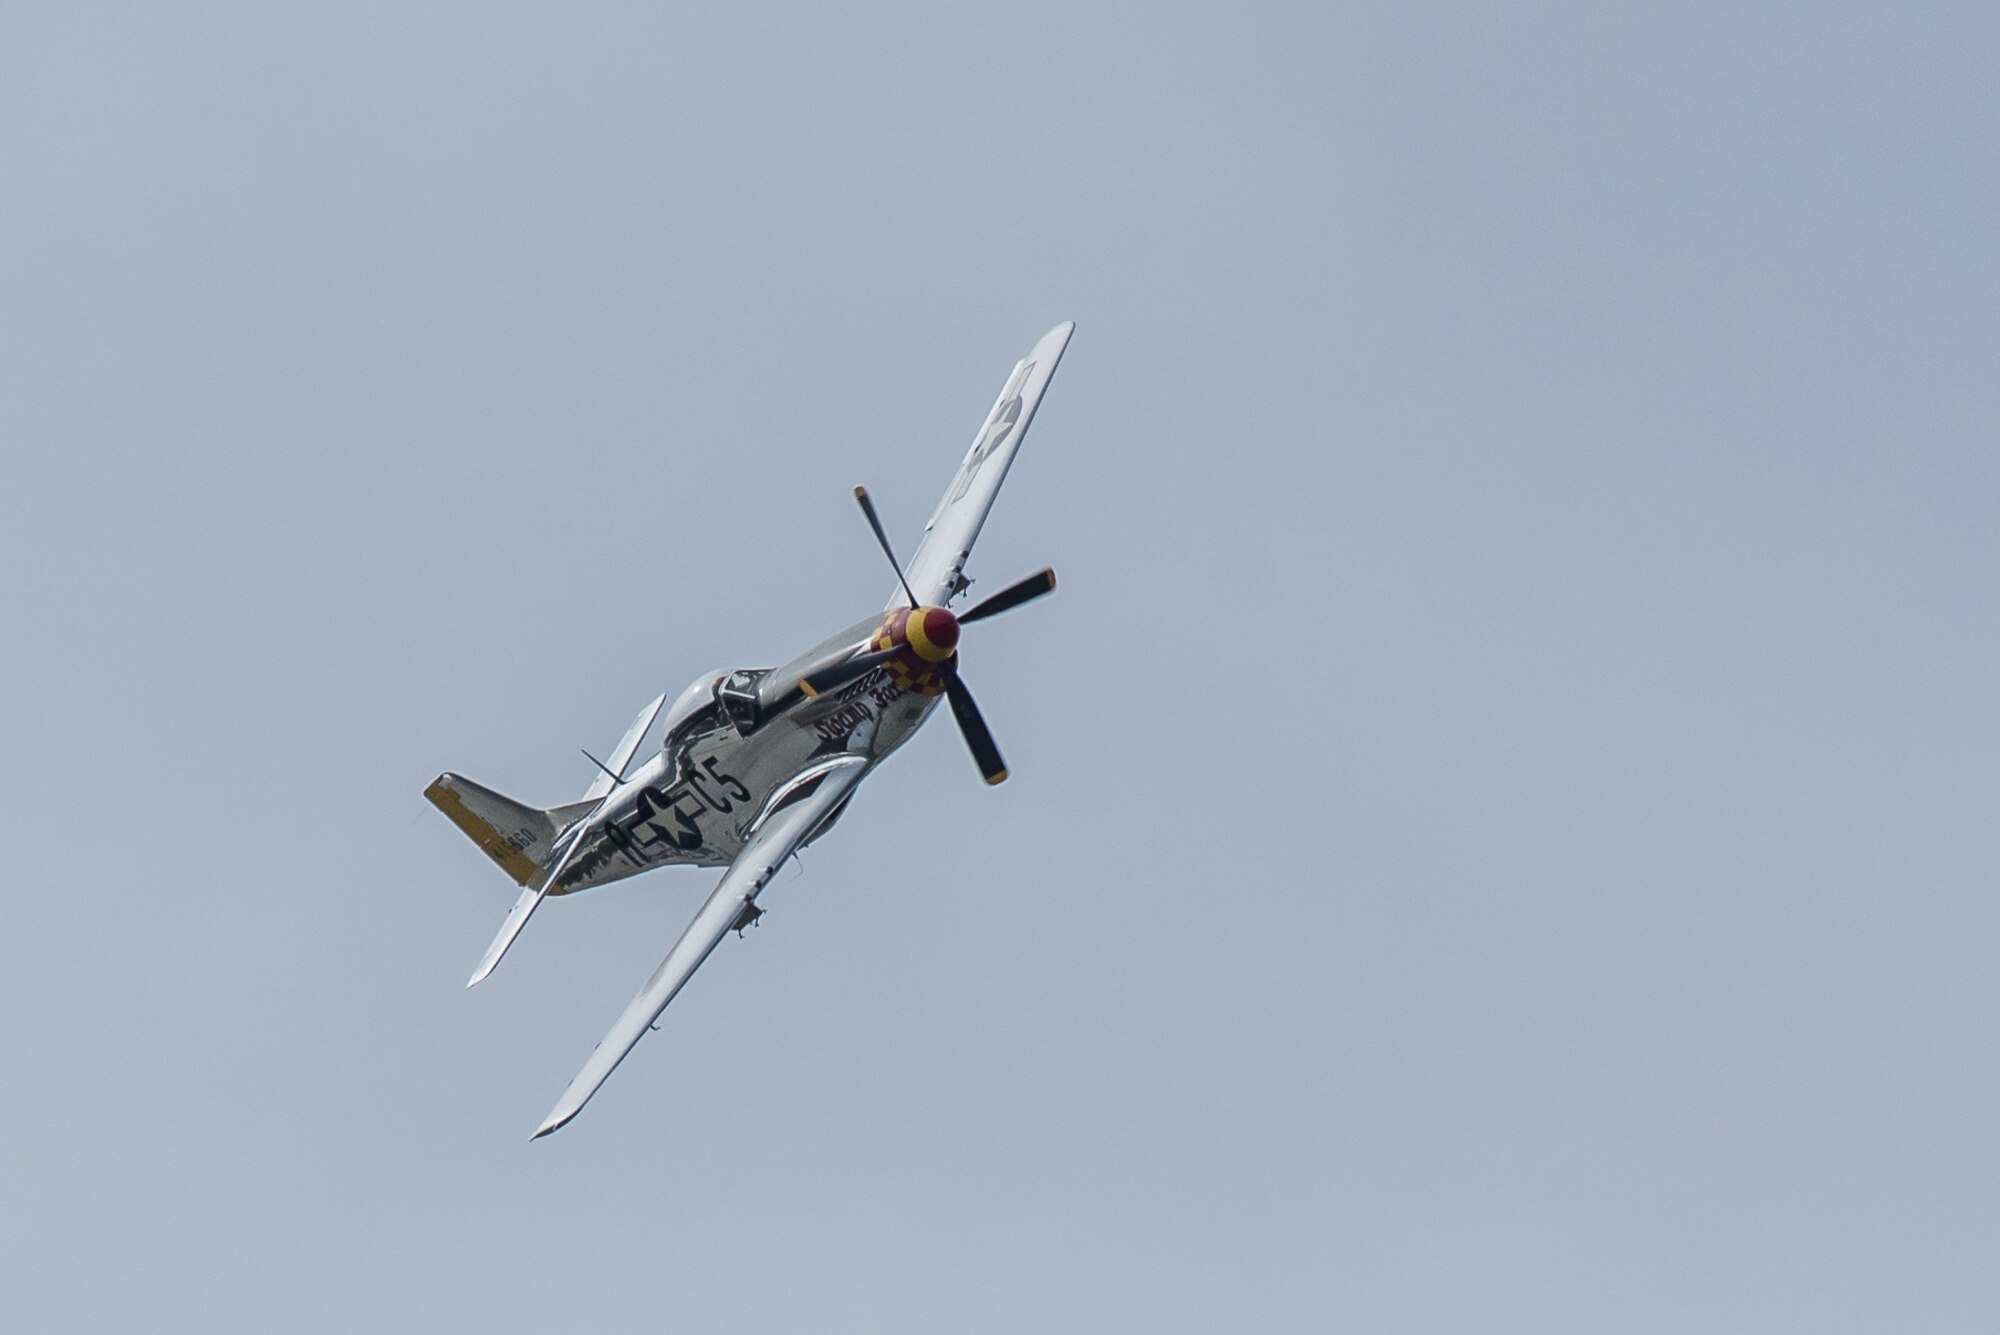 Swamp Fox, a P-51 Mustang aircraft flown by R.T. Dickson, performs an aerial demonstration April 13, 2019, in the annual Thunder Over Louisville airshow in Louisville, Ky. This exact aircraft, now restored, was once assigned to the Kentucky Air National Guard more than 60 years ago when the unit’s mission was aerial defense. (U.S. Air National Guard photo by Dale Greer)